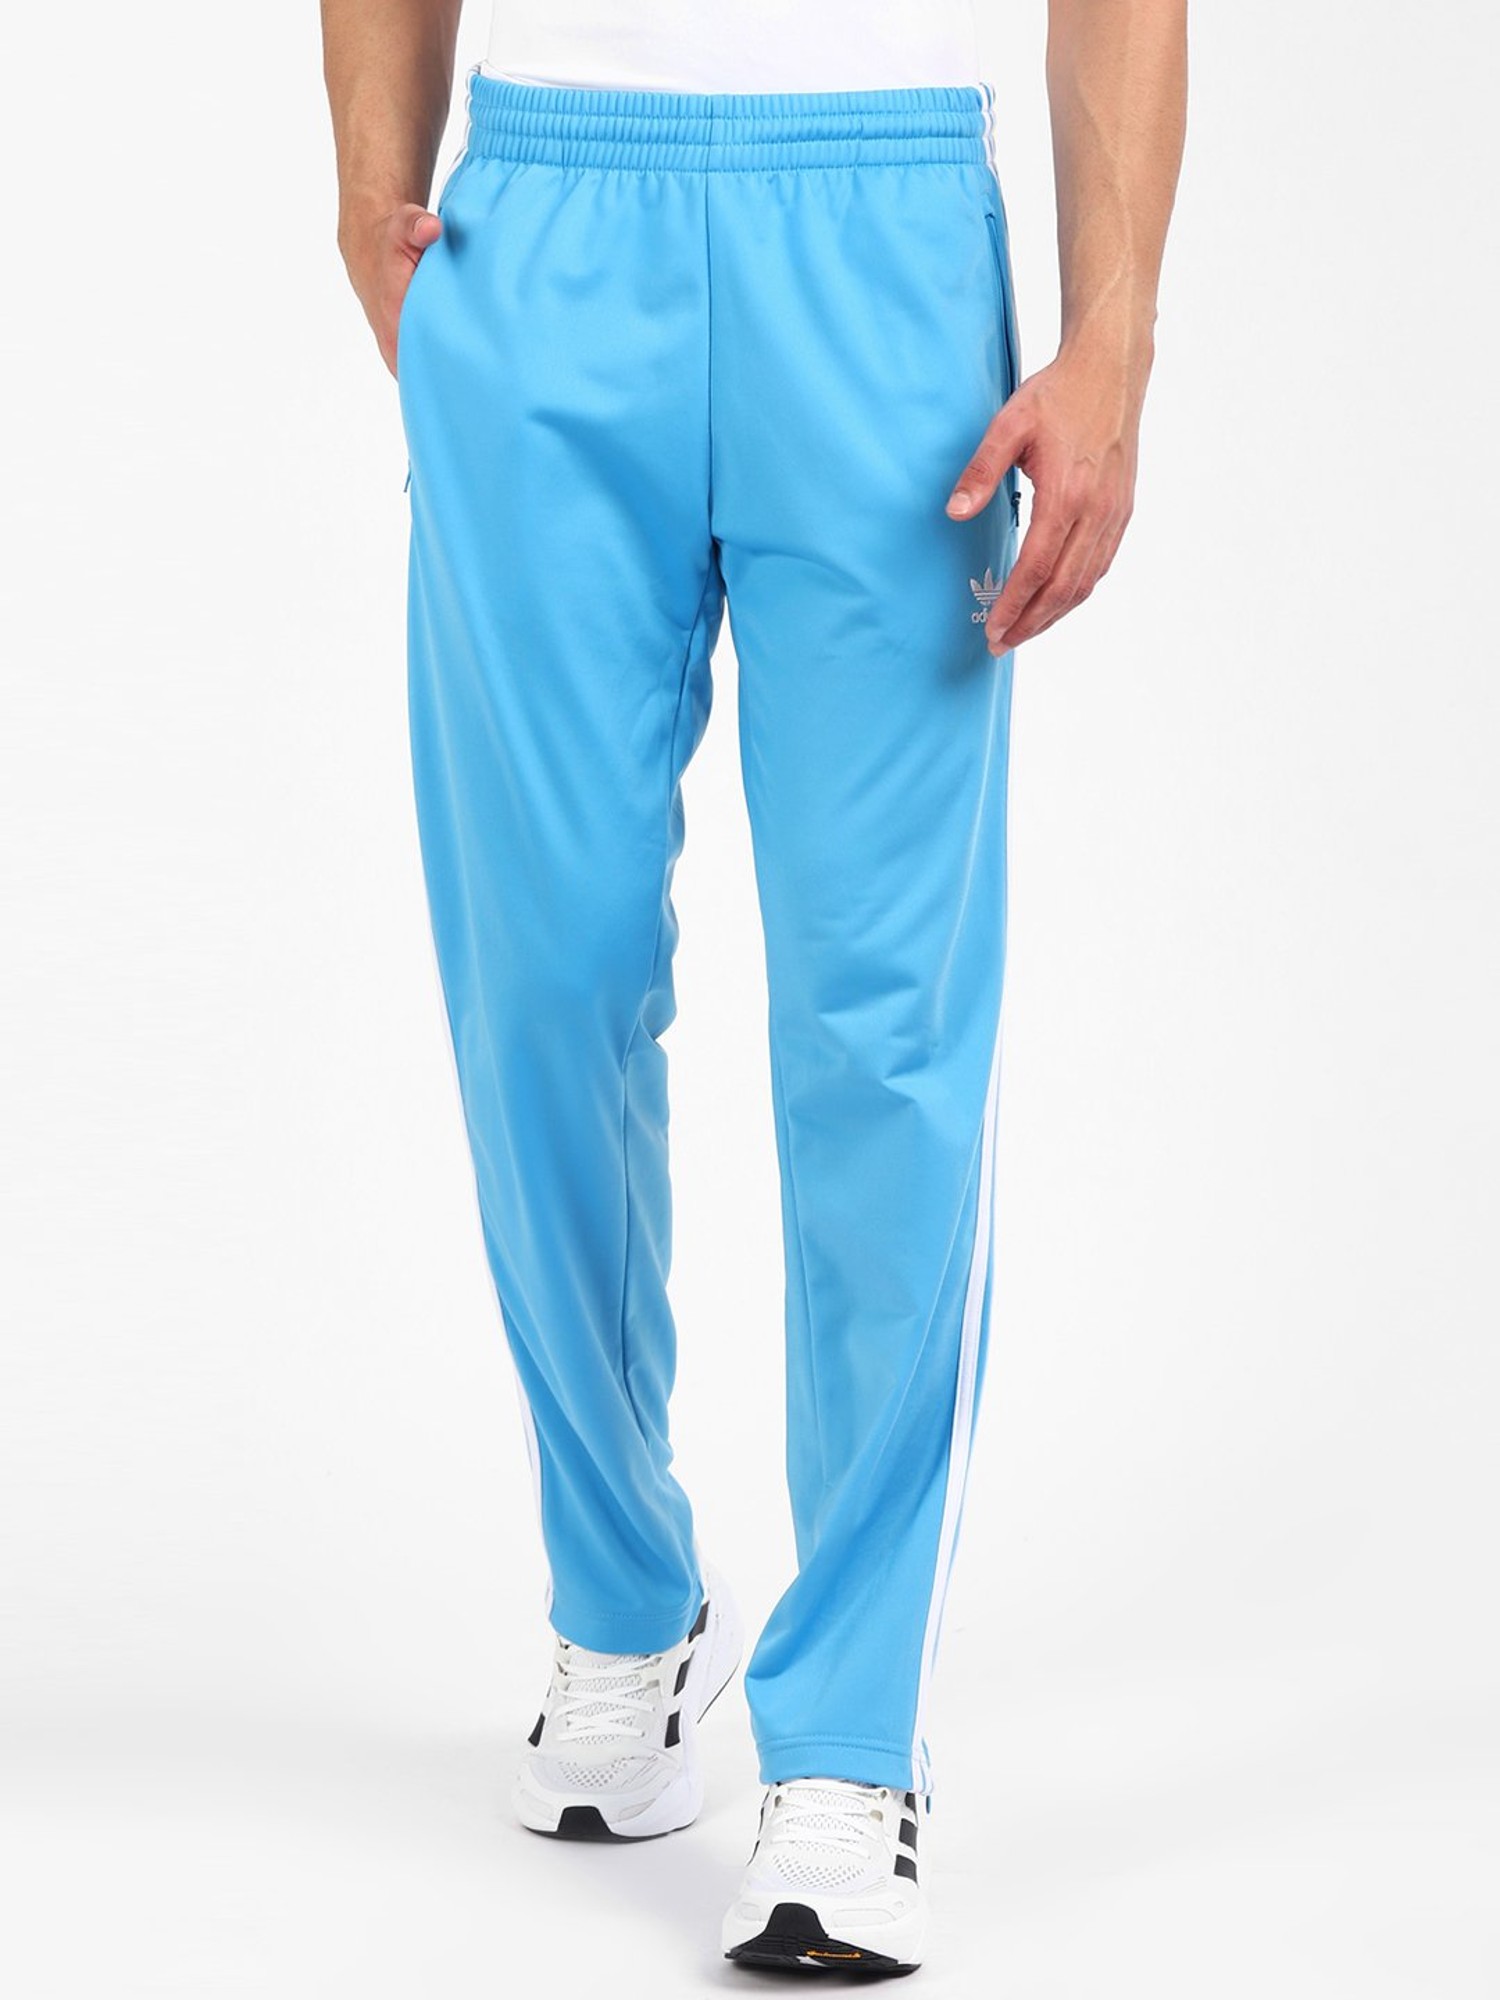 Triumph MensBoys Team India Track Pants Sky Blue Size XSmall   Amazonin Clothing  Accessories